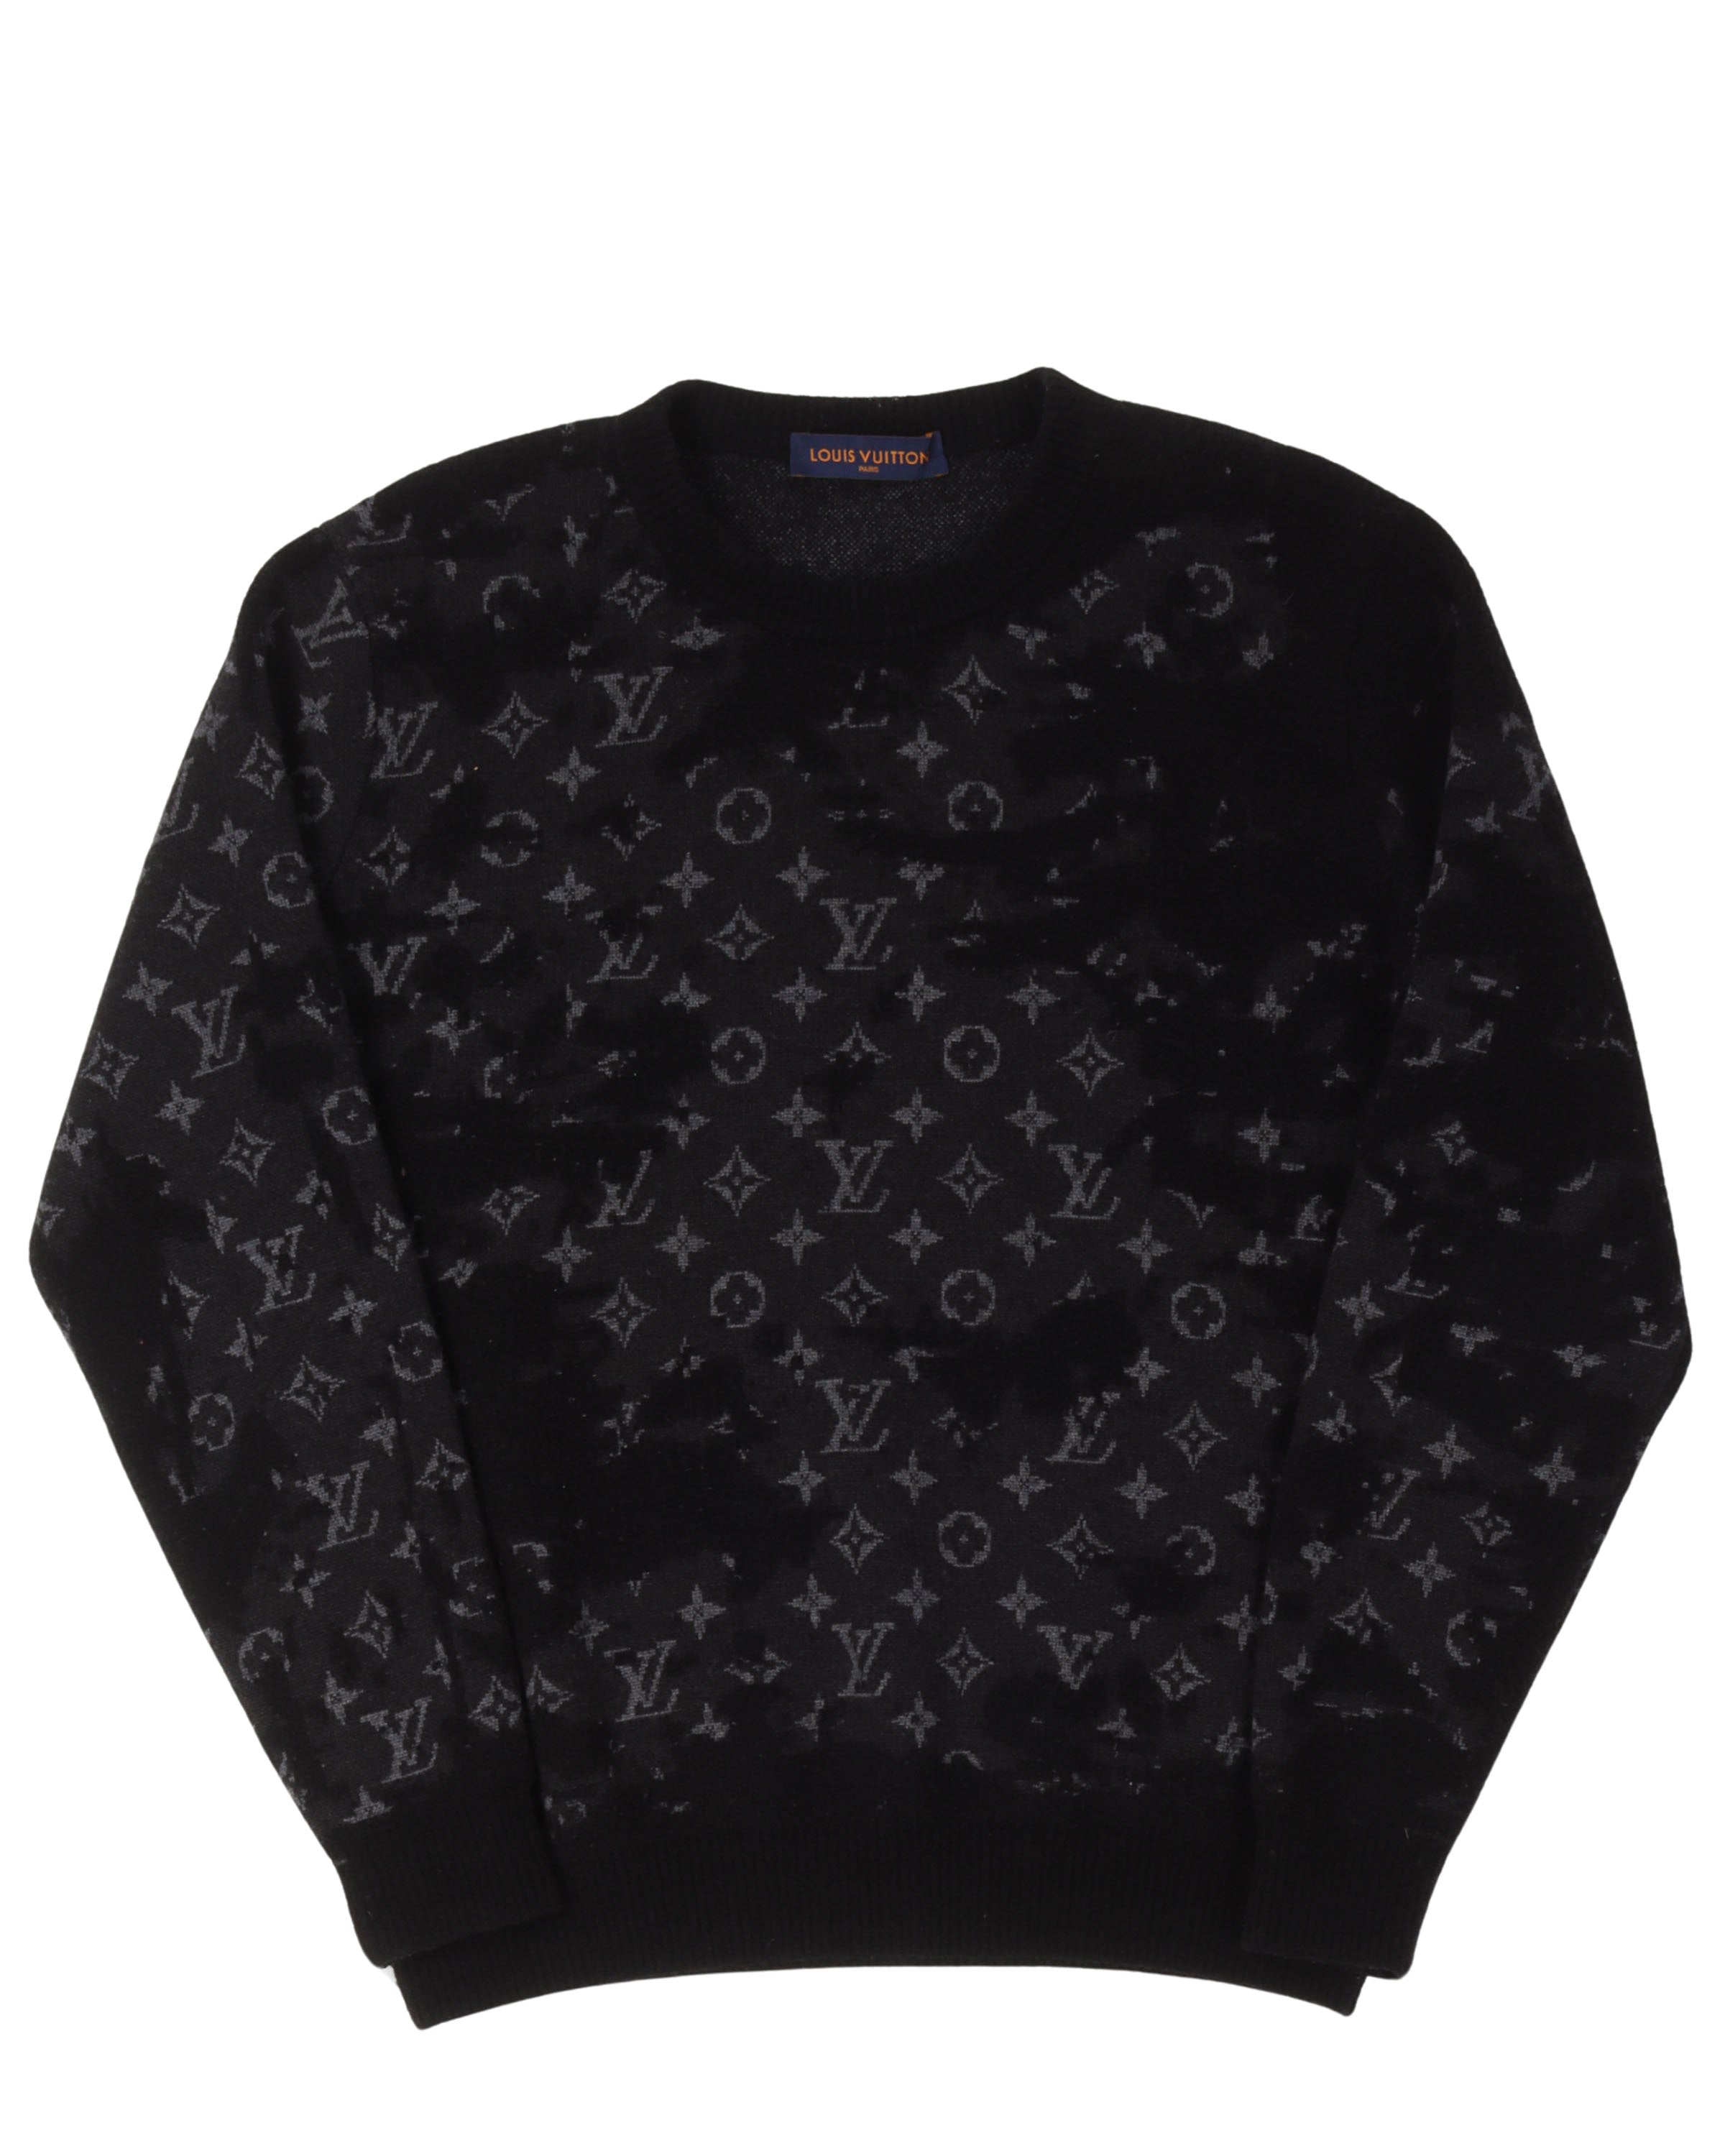 Louis Vuitton black pattern sweater - LIMITED EDITION